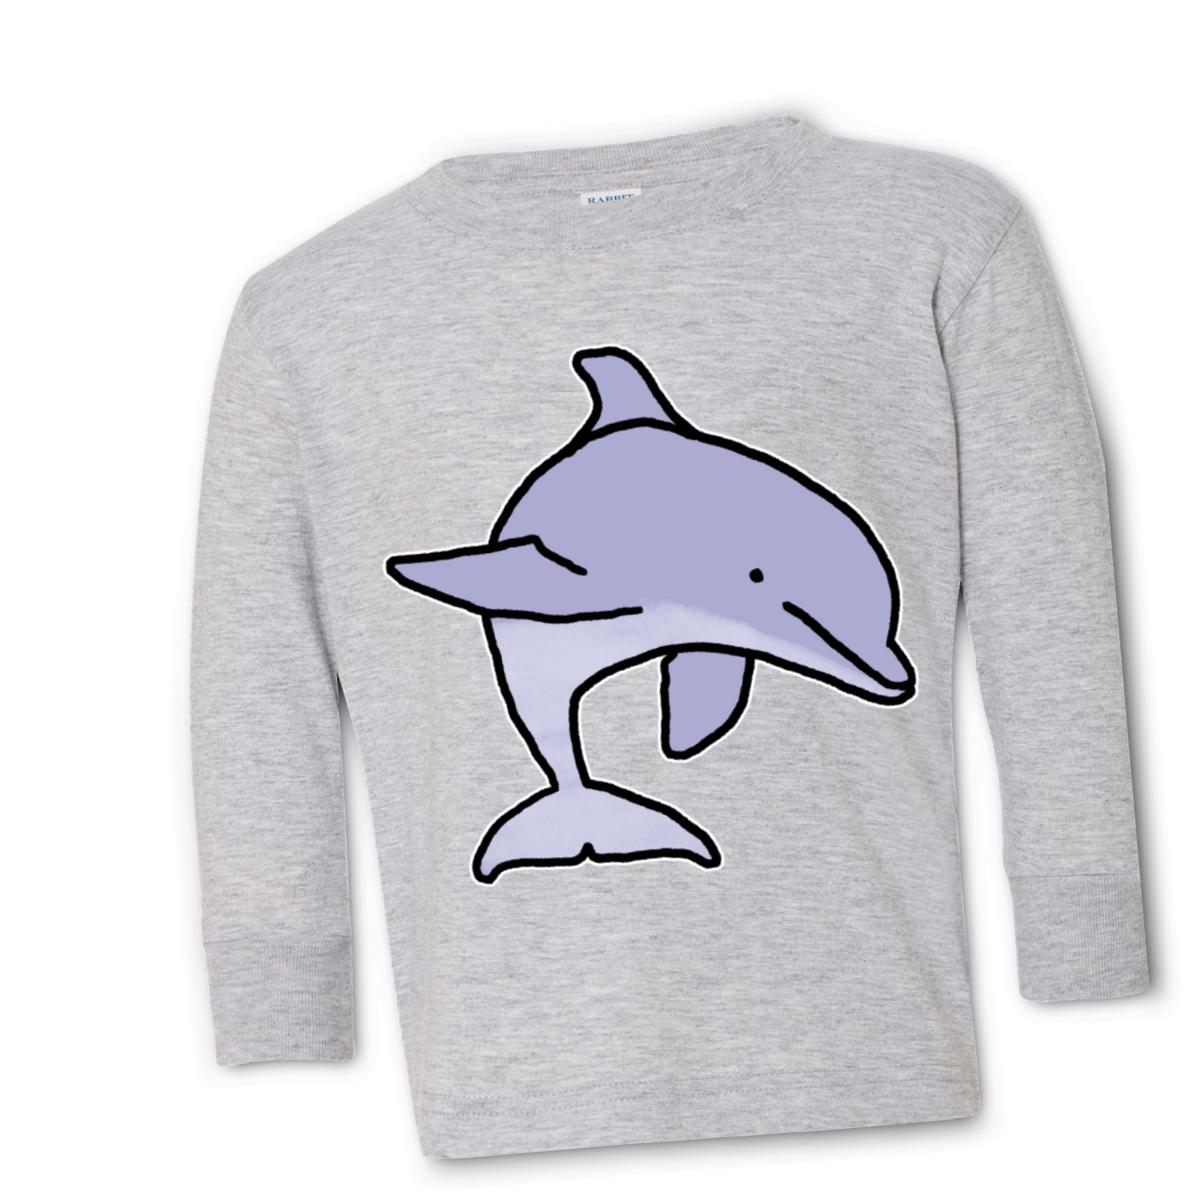 Dolphin Toddler Long Sleeve Tee 4T heather